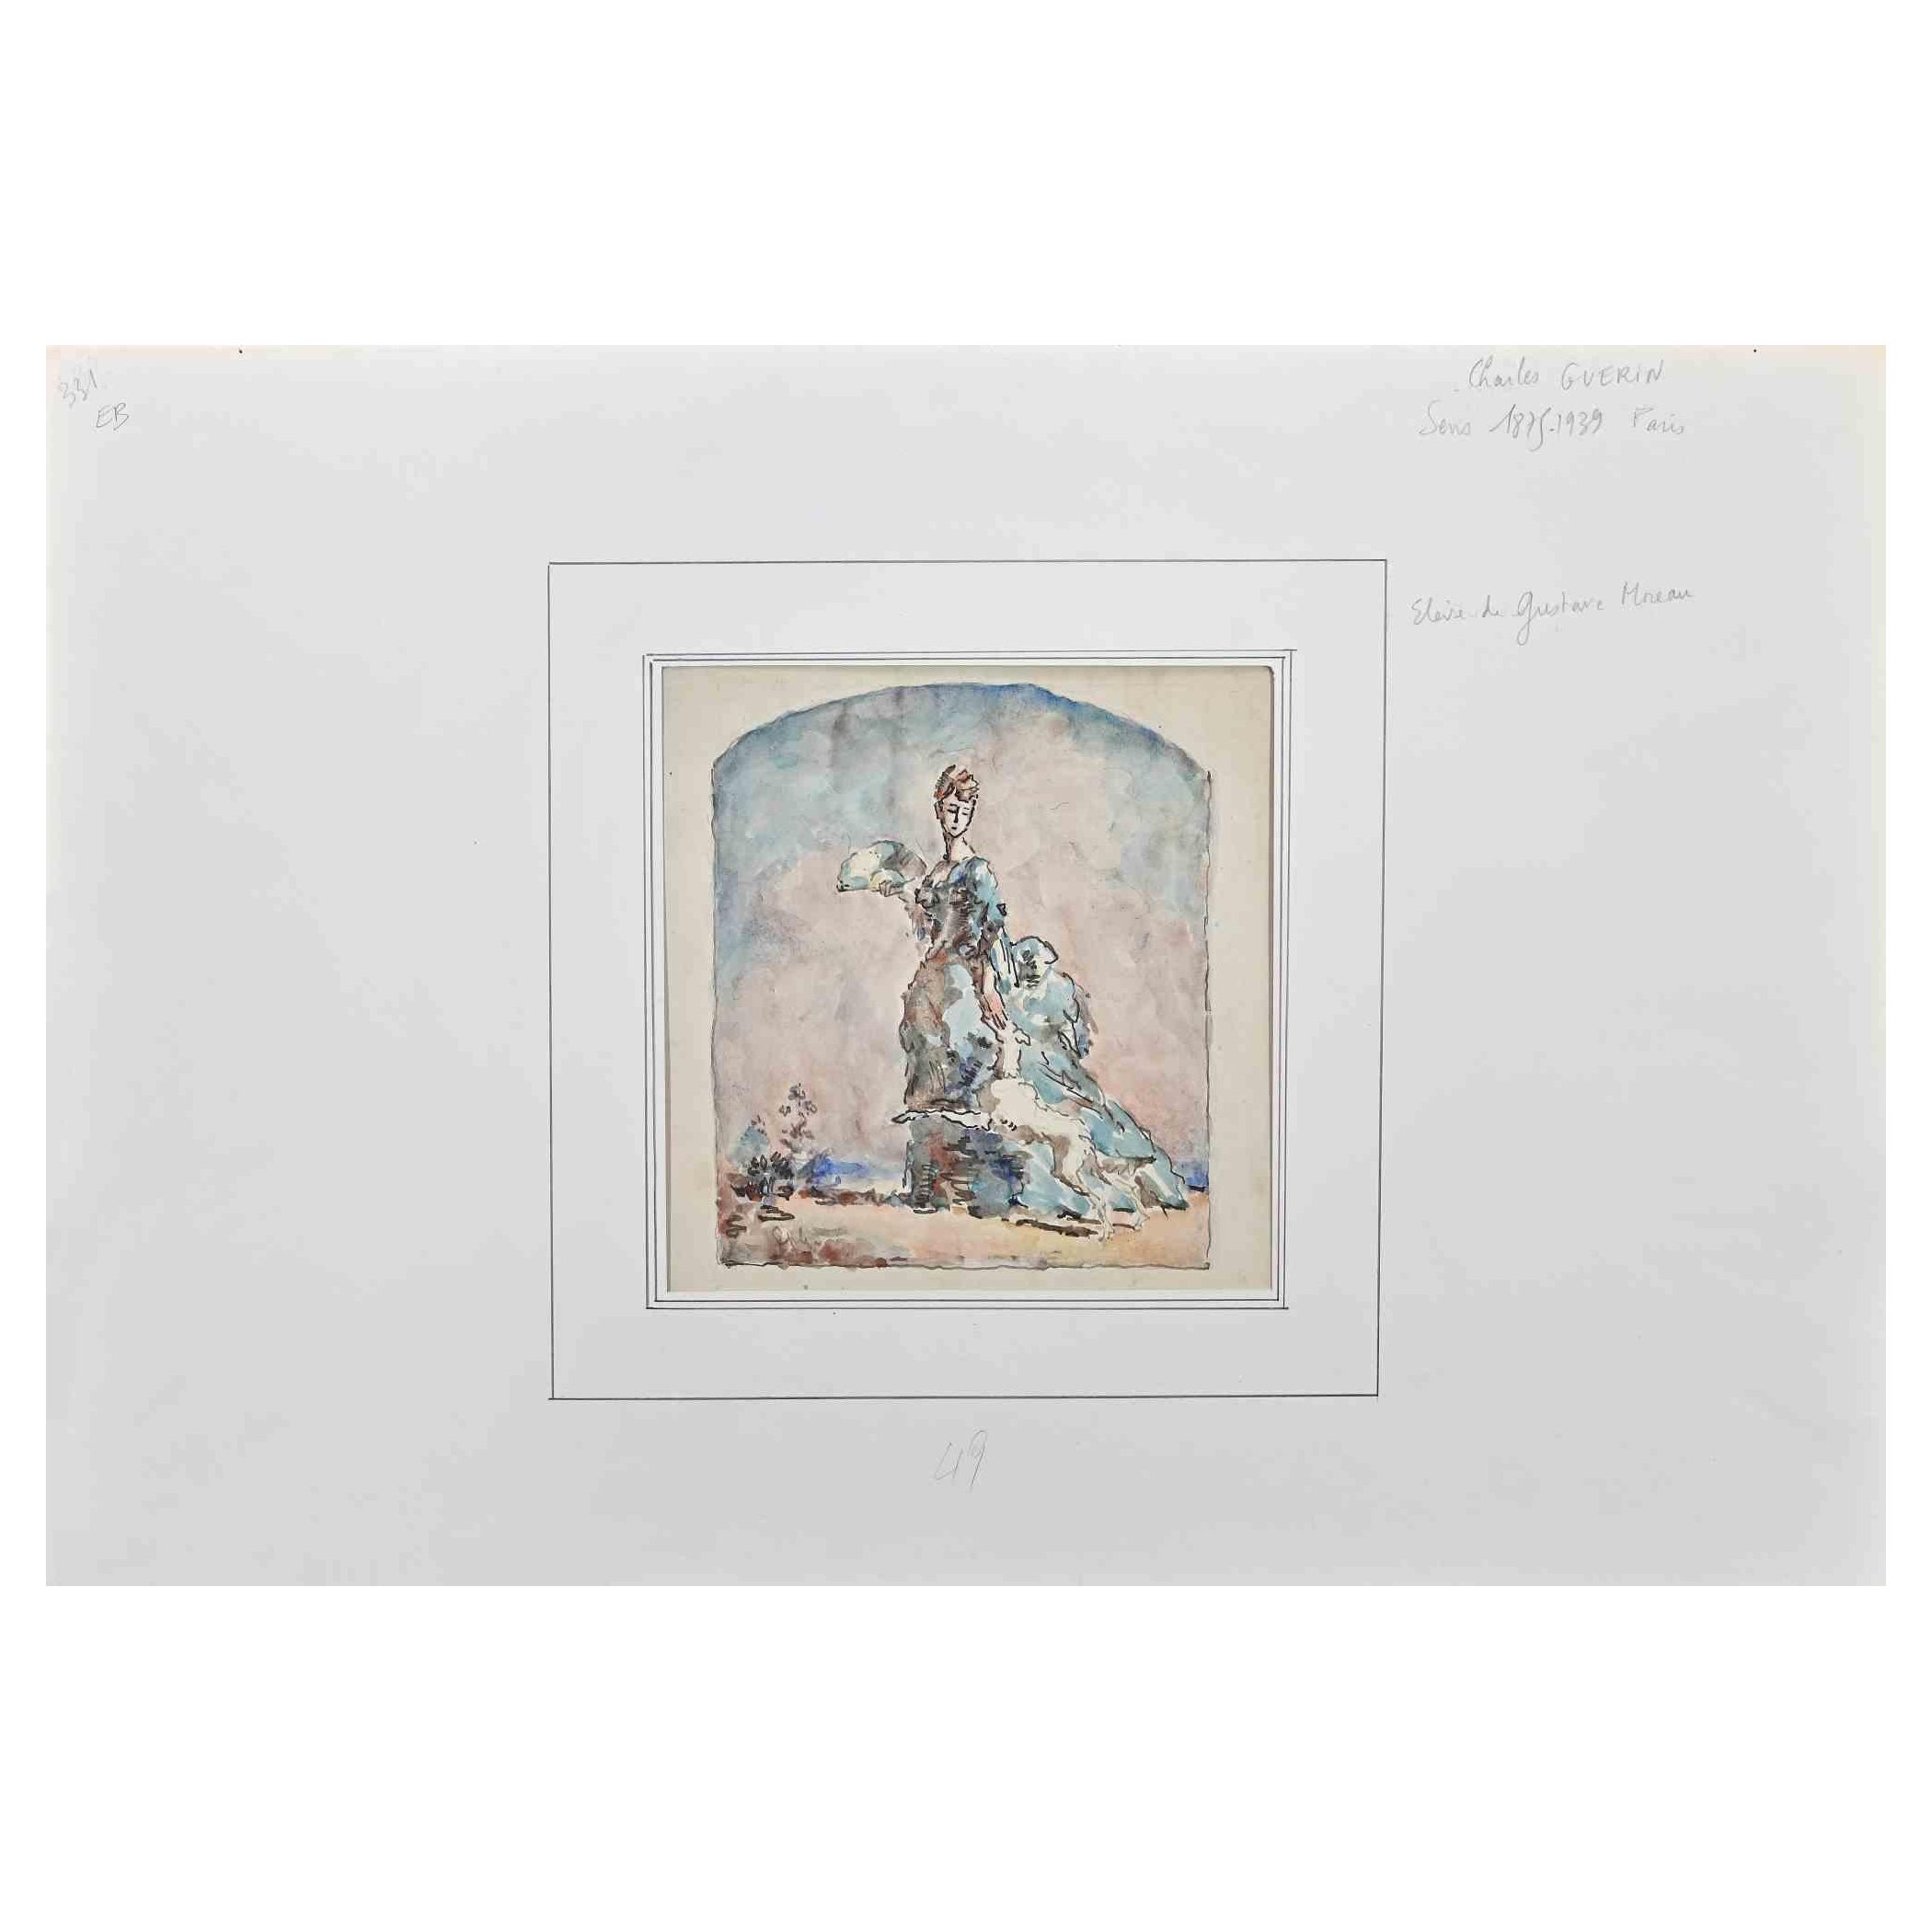 Woman is an Original China Ink and Watercolour realized by Charles Guerin (1875-1939).

Good condition on a yellowed paper included a white cardboard passpartout (37.5x54.5 cm).

No signature.

Charles Guerin (Sens, 1875 - 1939), a French artist,